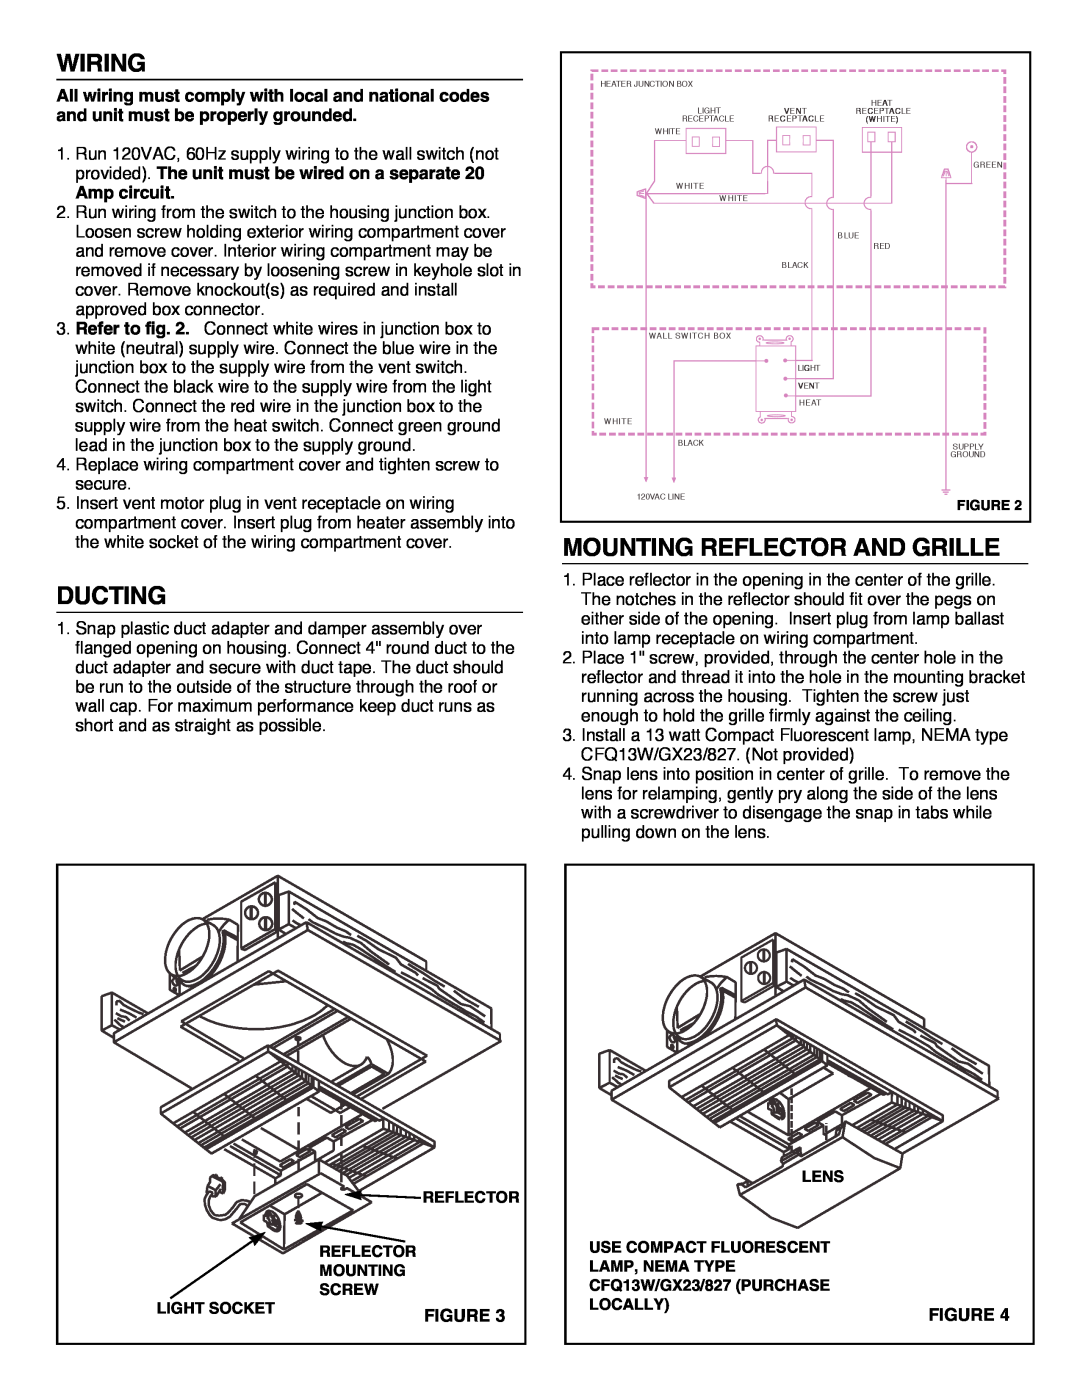 NuTone 665RF installation instructions Wiring, Ducting, Mounting Reflector And Grille, Amp circuit 